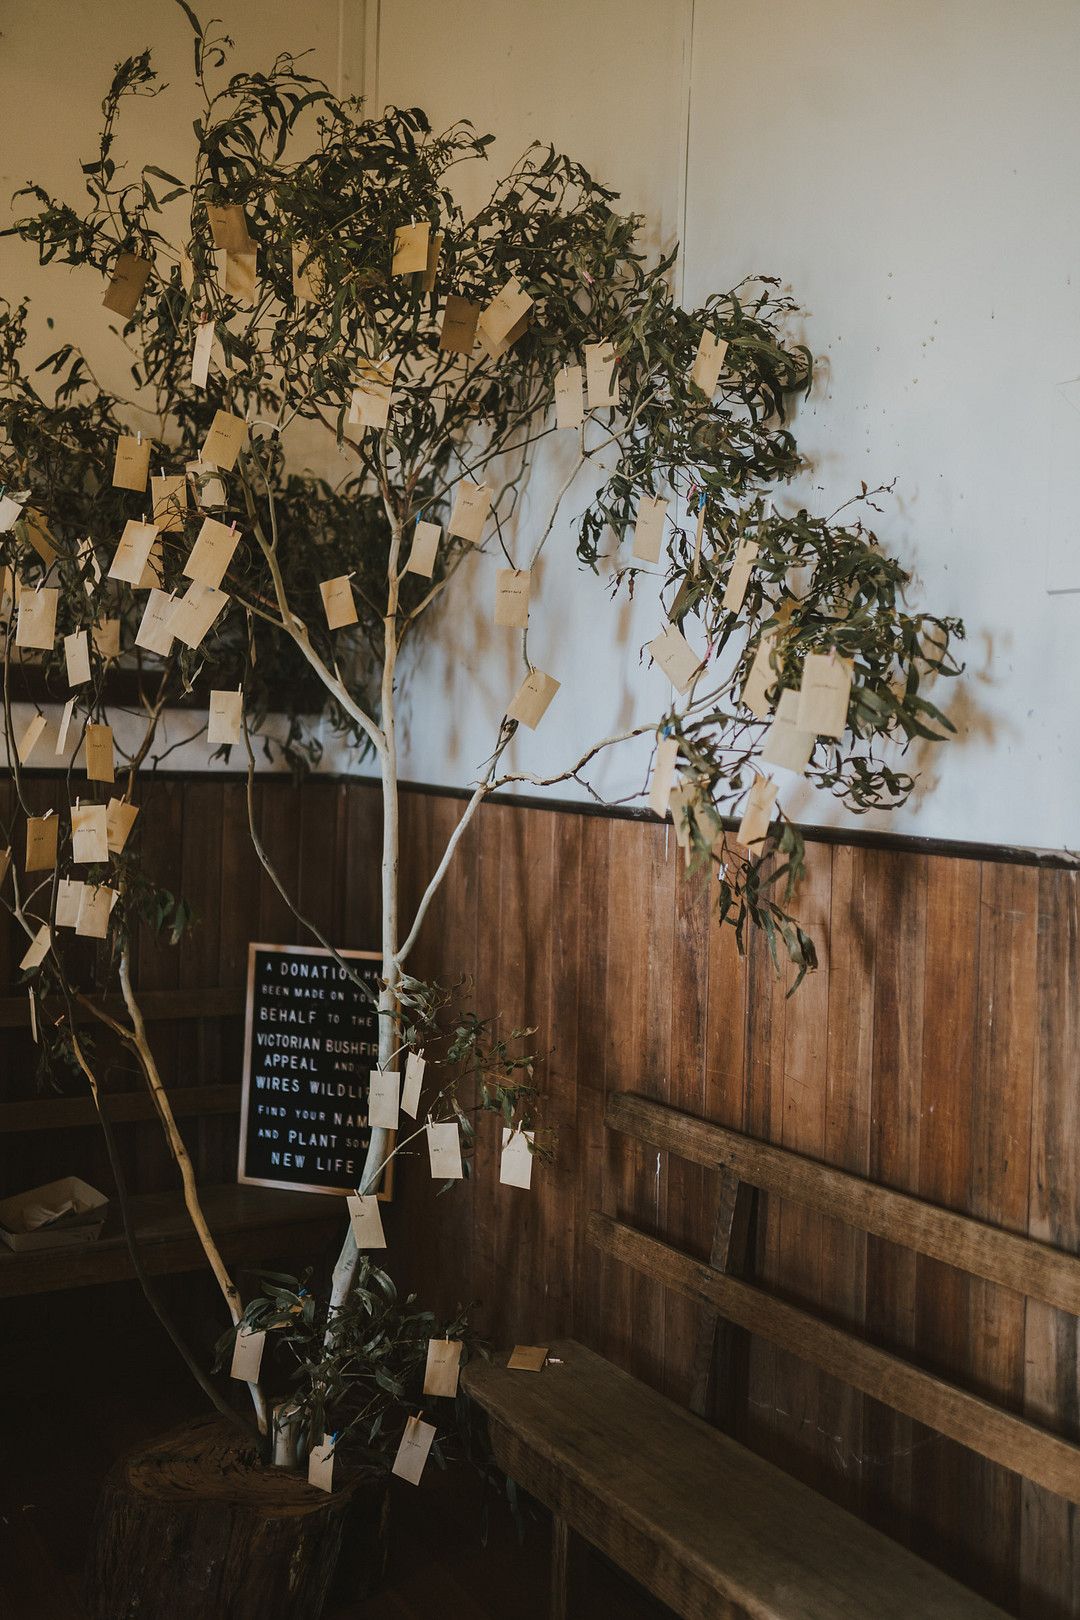 Tree with rustic wedding party favors